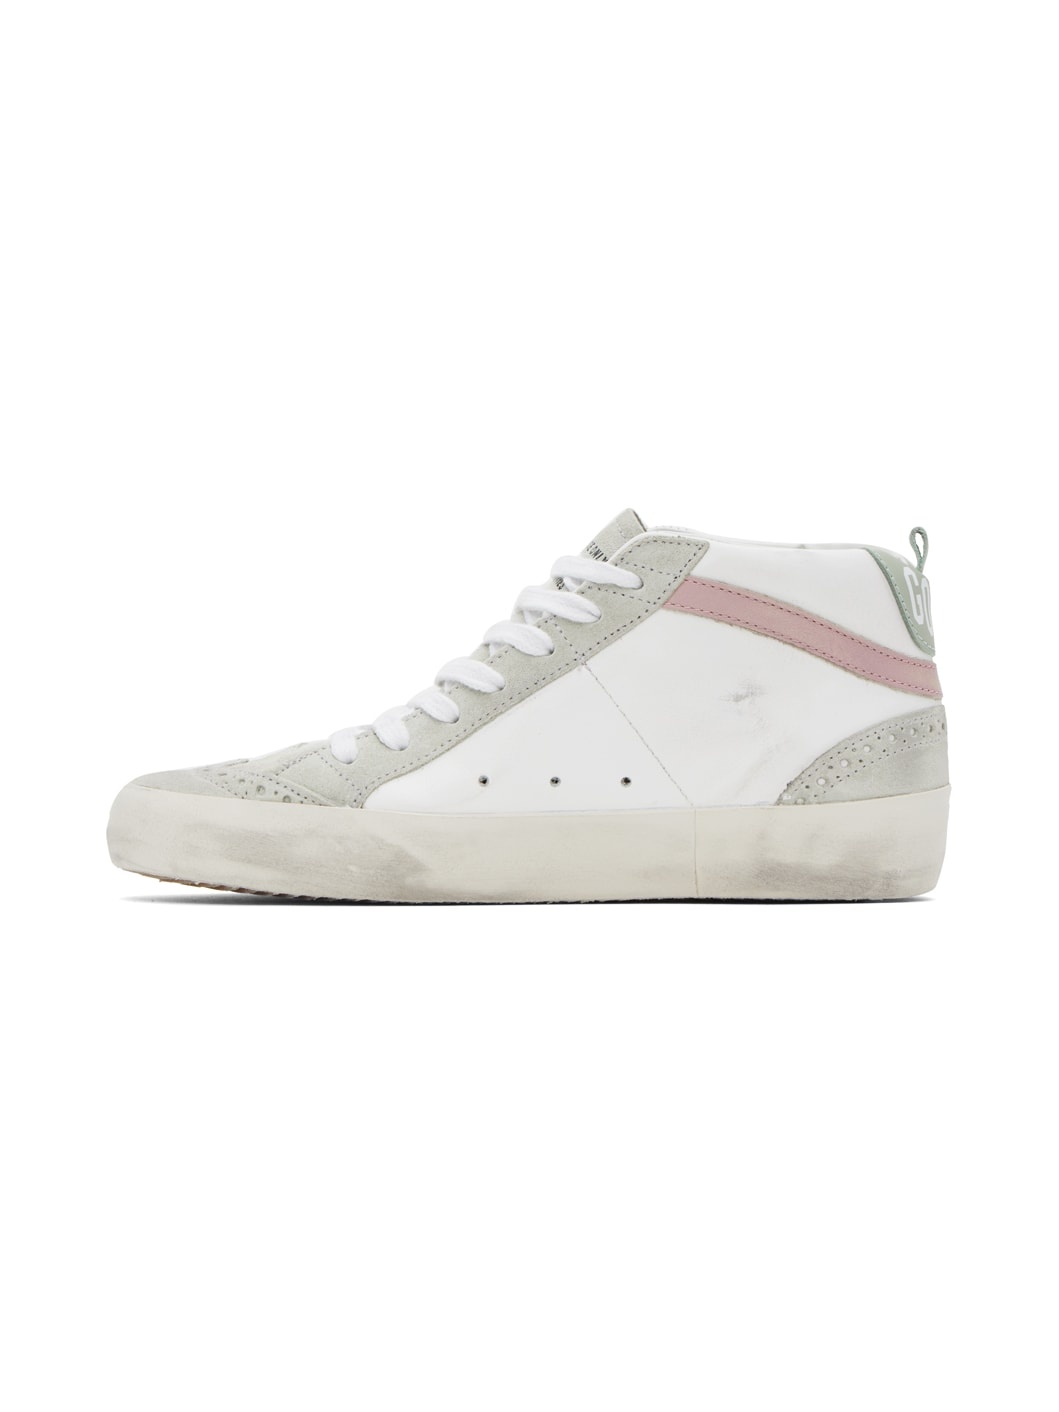 SSENSE Exclusive White & Gray Mid Star Sneakers - 3